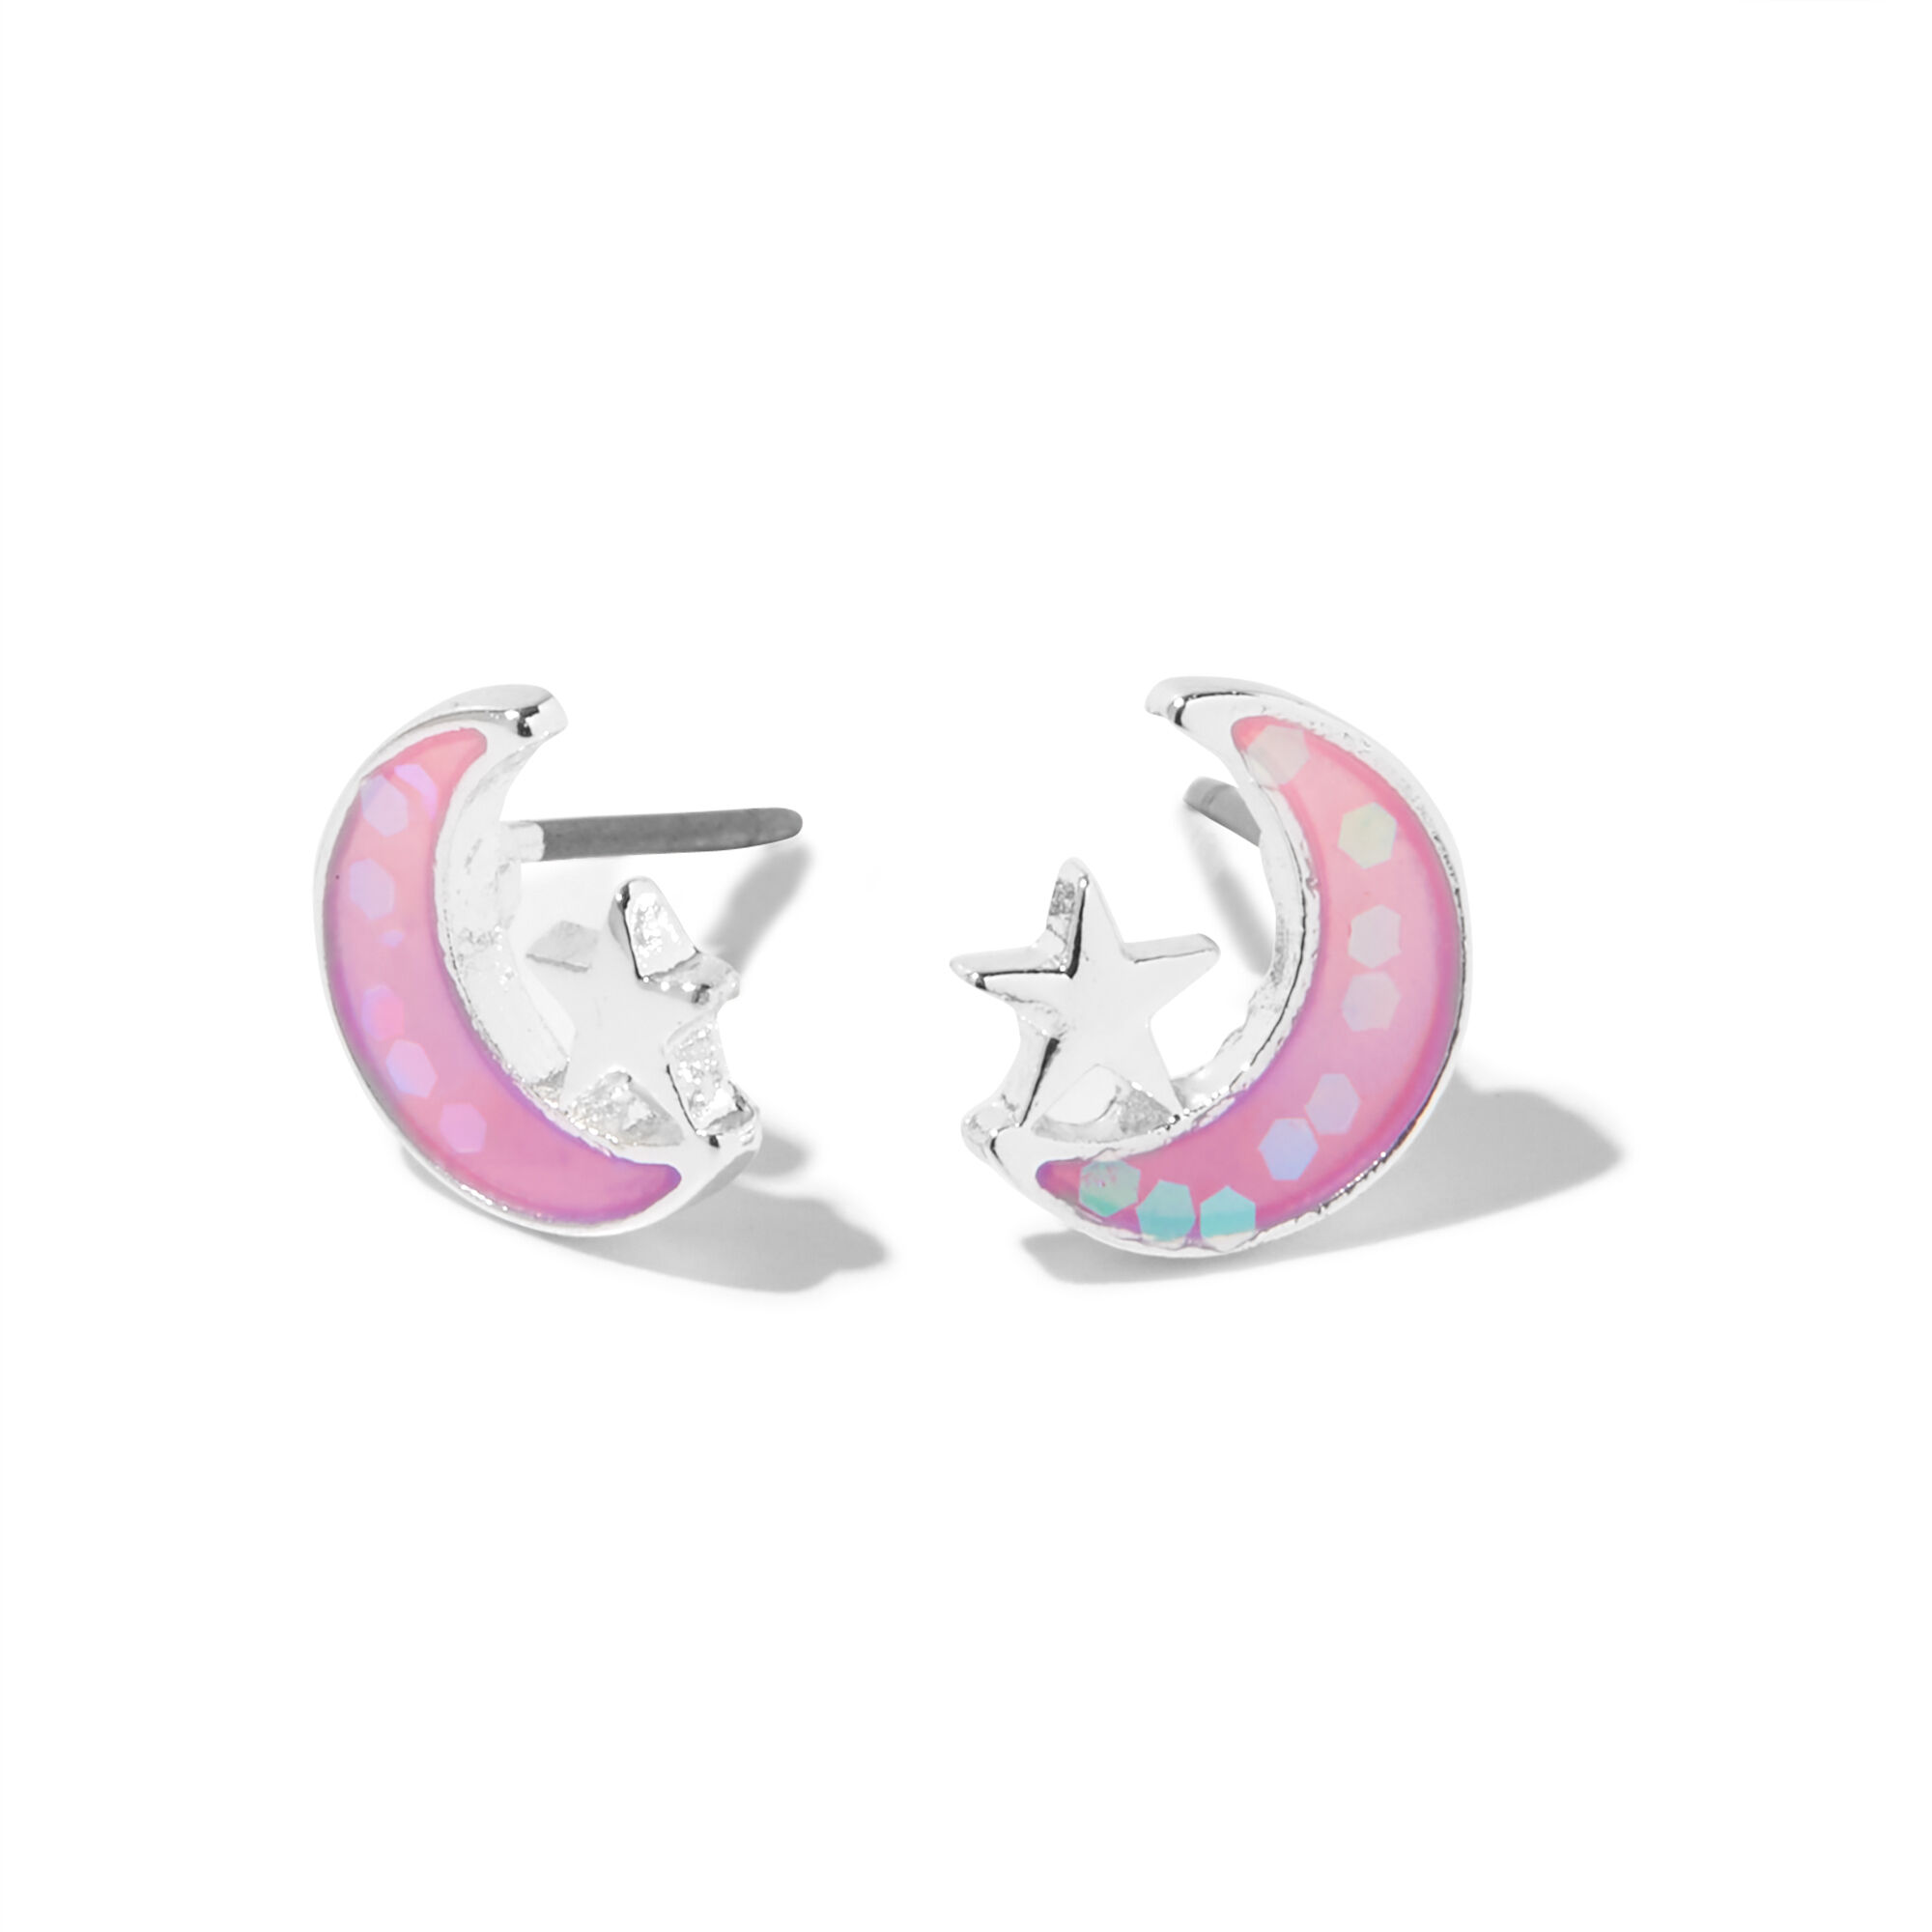 View Claires Crescent Moon SilverTone Star Stud Earrings Pink information